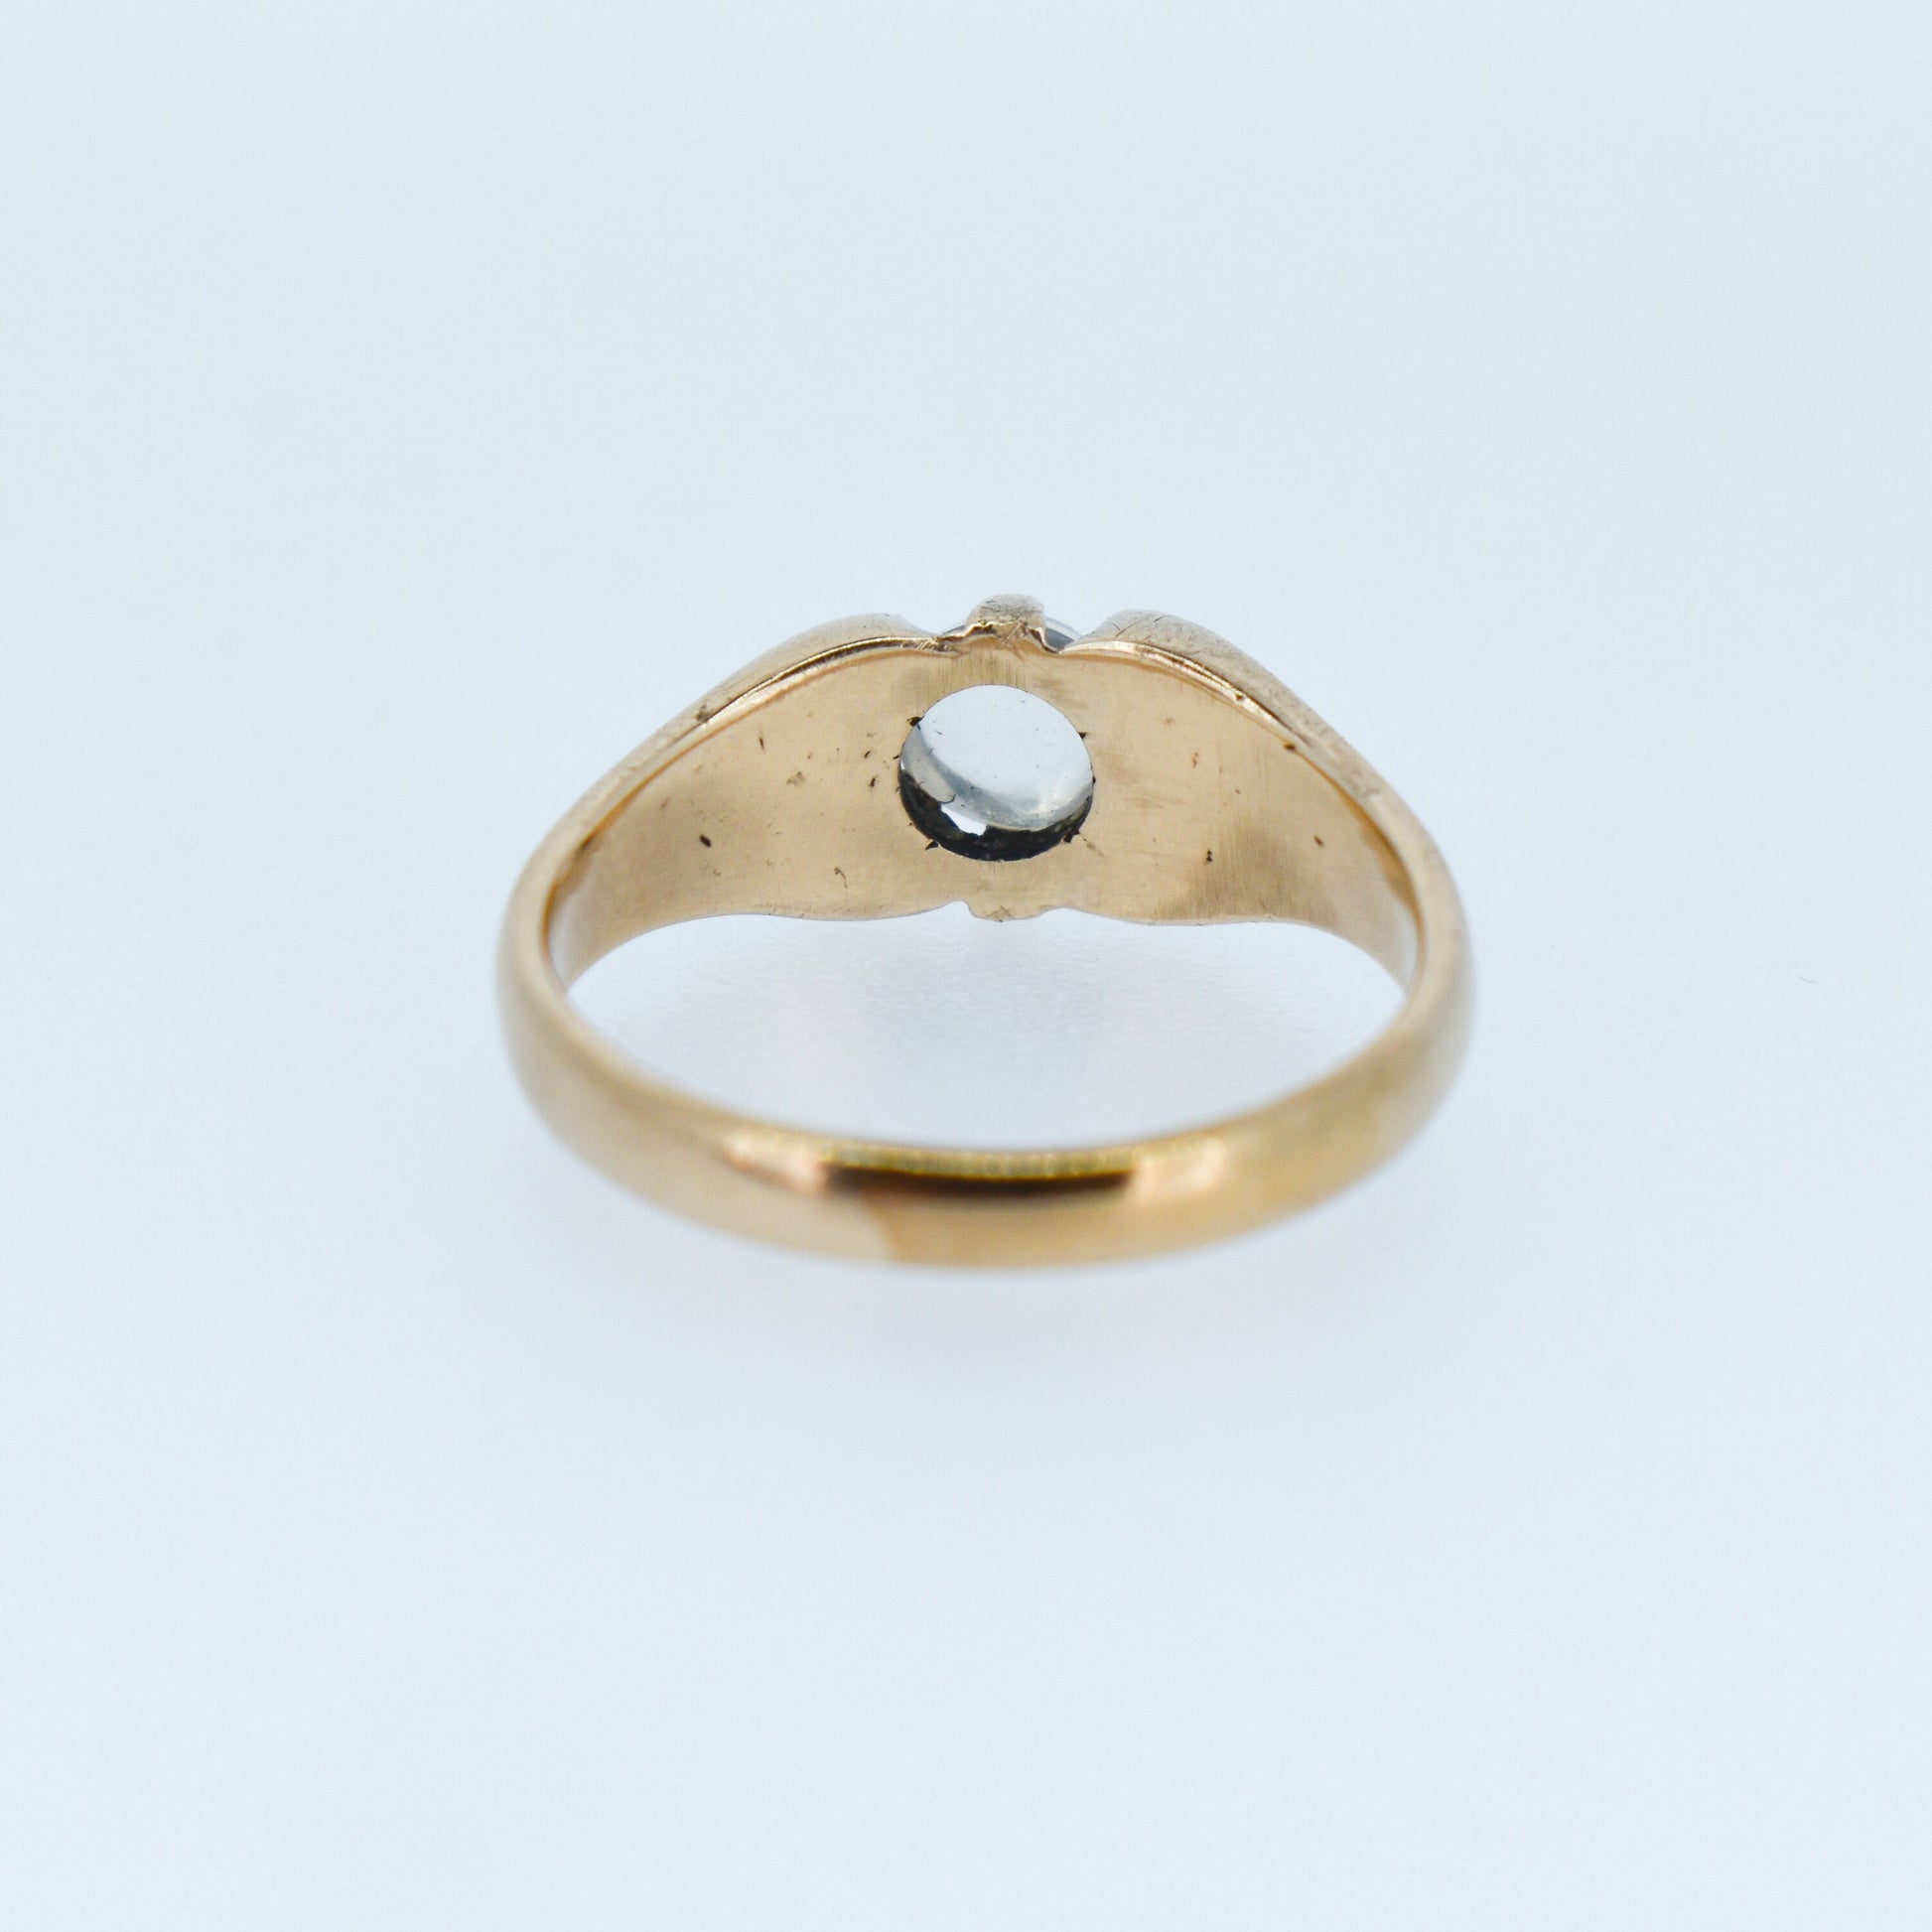 Antique Moonstone Belcher Solitaire 9ct 9K Yellow Gold Ring | Edwardian